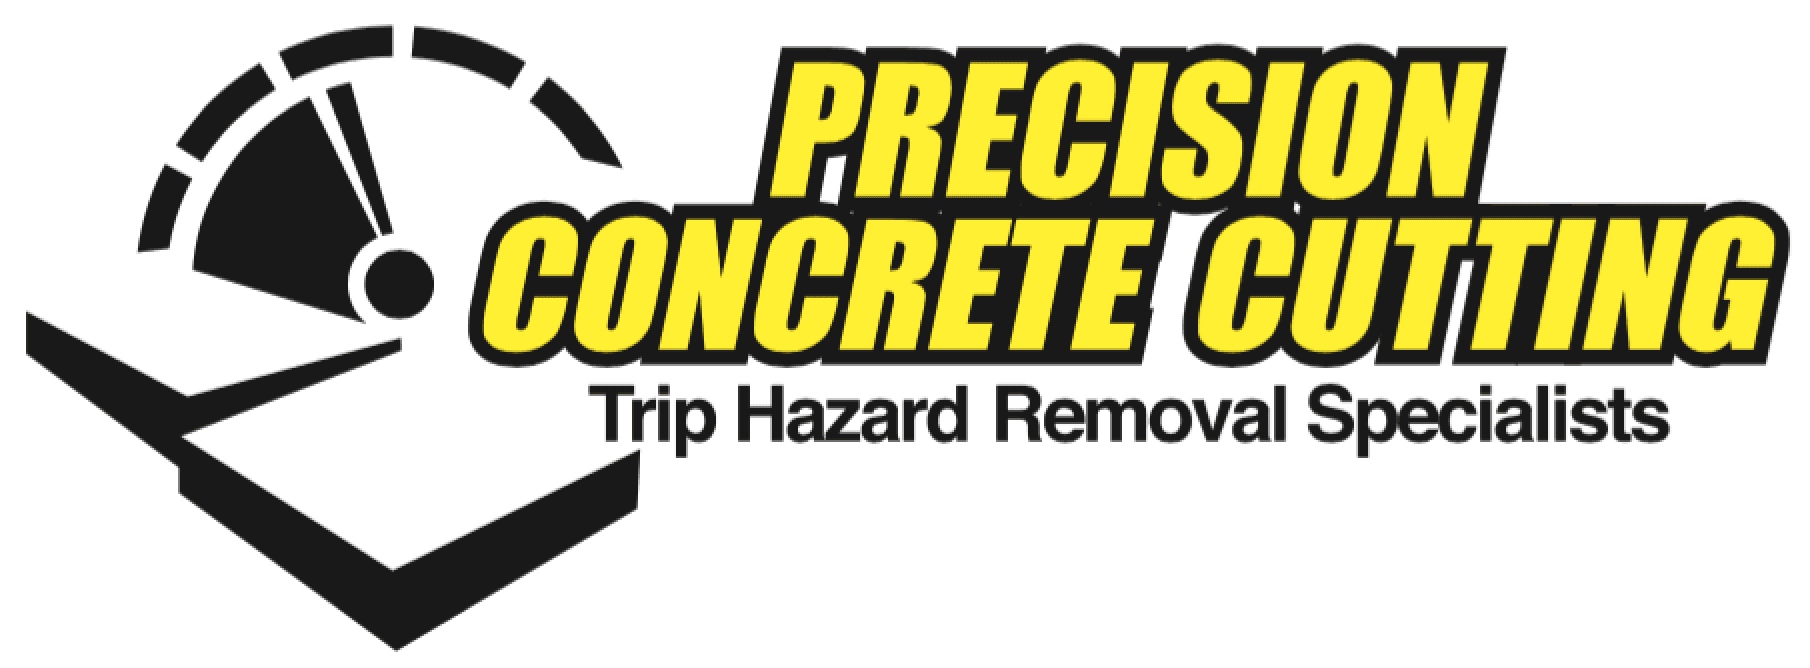 Product Services - Precision Concrete Cutting of KY image